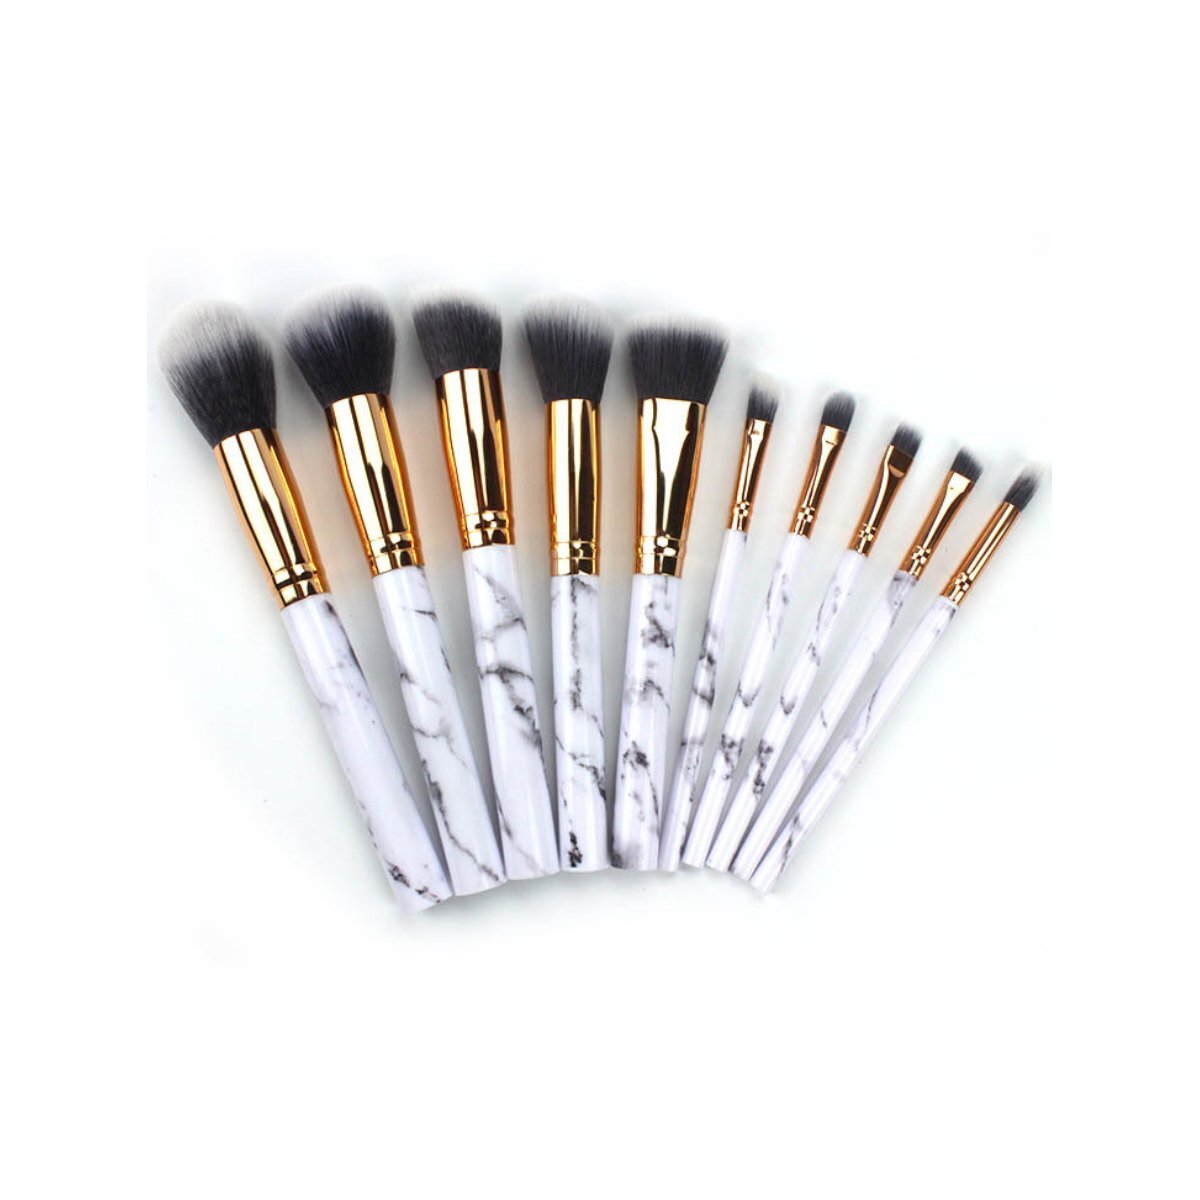 Color: White Luster - La Canica 10 In 1 Makeup Brush Set With Travel Friendly Container